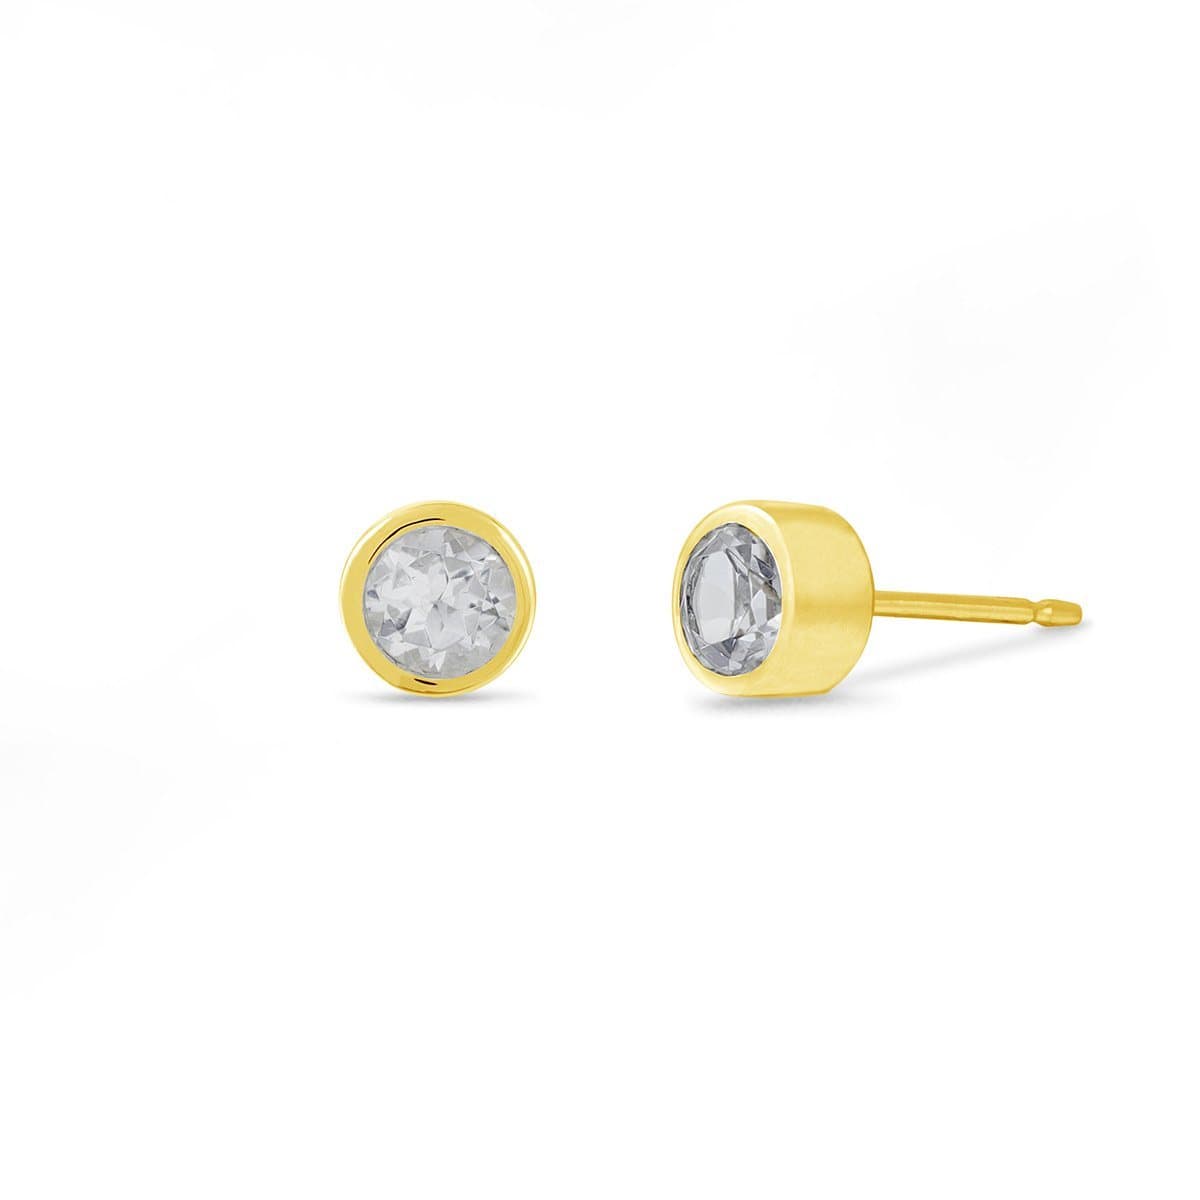 Boma Jewelry Earrings 14K Gold Vermeil with White Topaz Belle Studs with White Topaz